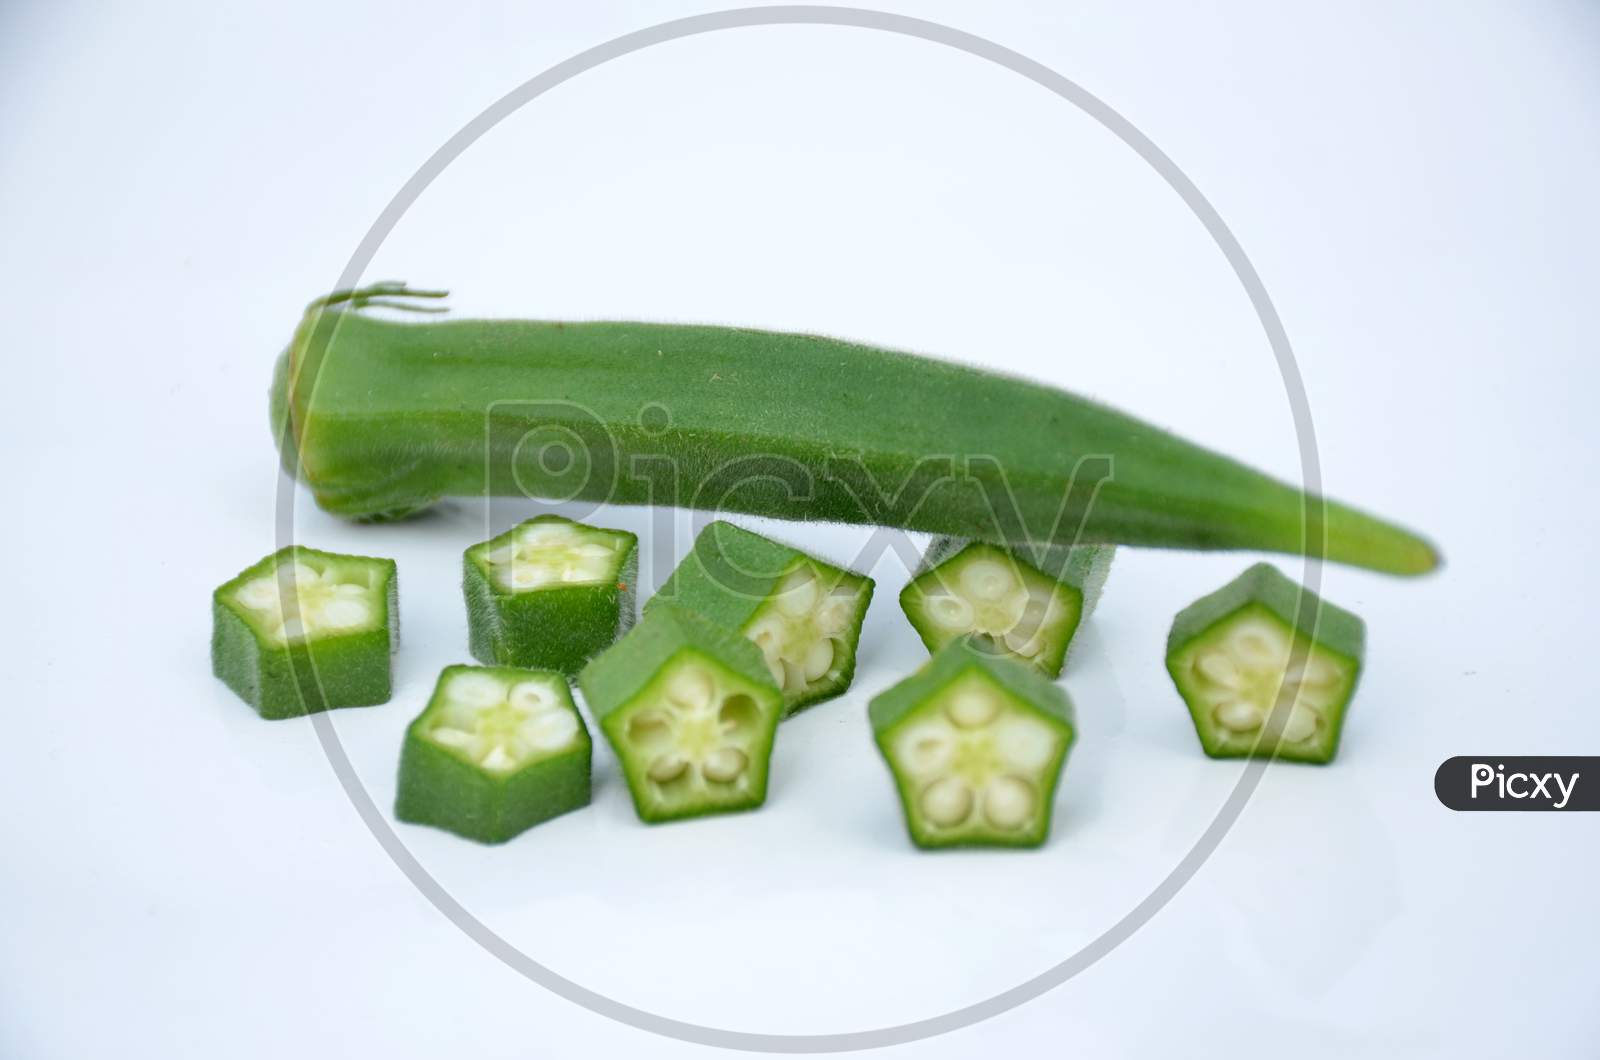 the ripe green ladyfinger with cutt roll isolated on white background.